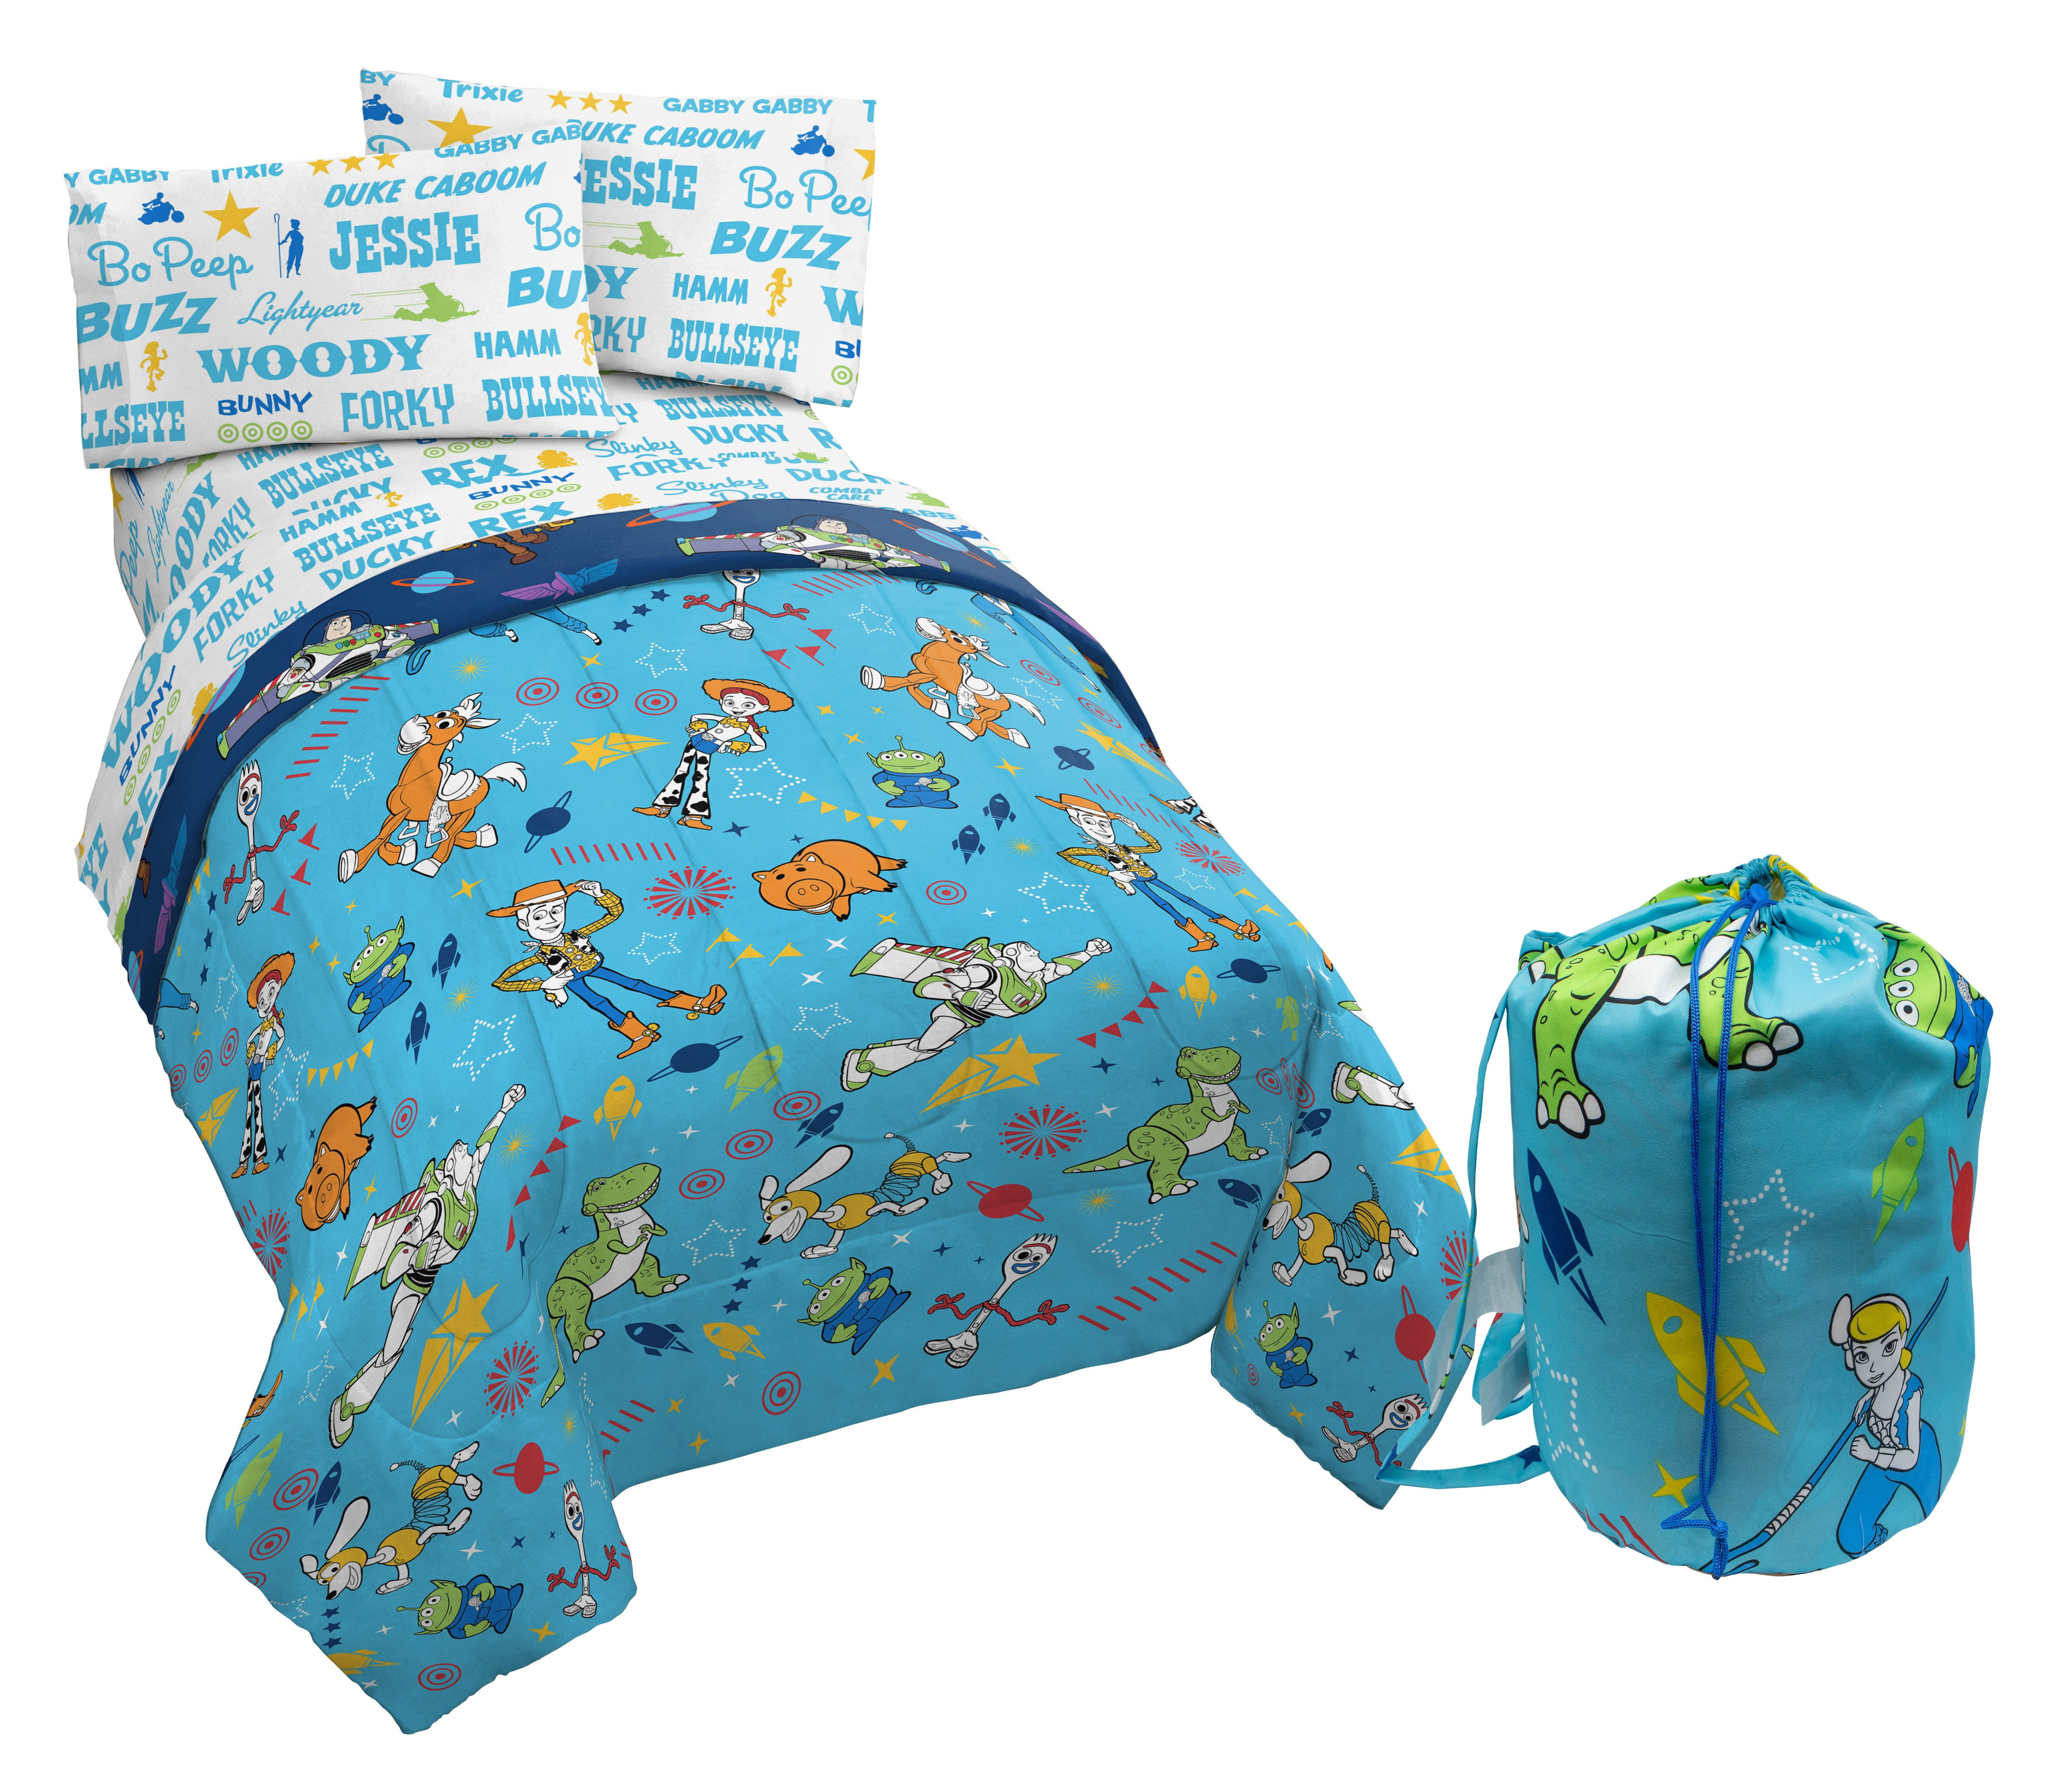 Details about   Disney Pixar Toy Story 'Play Time' 5 Piece Twin Bed Set w/Bonus Tote Reversible 